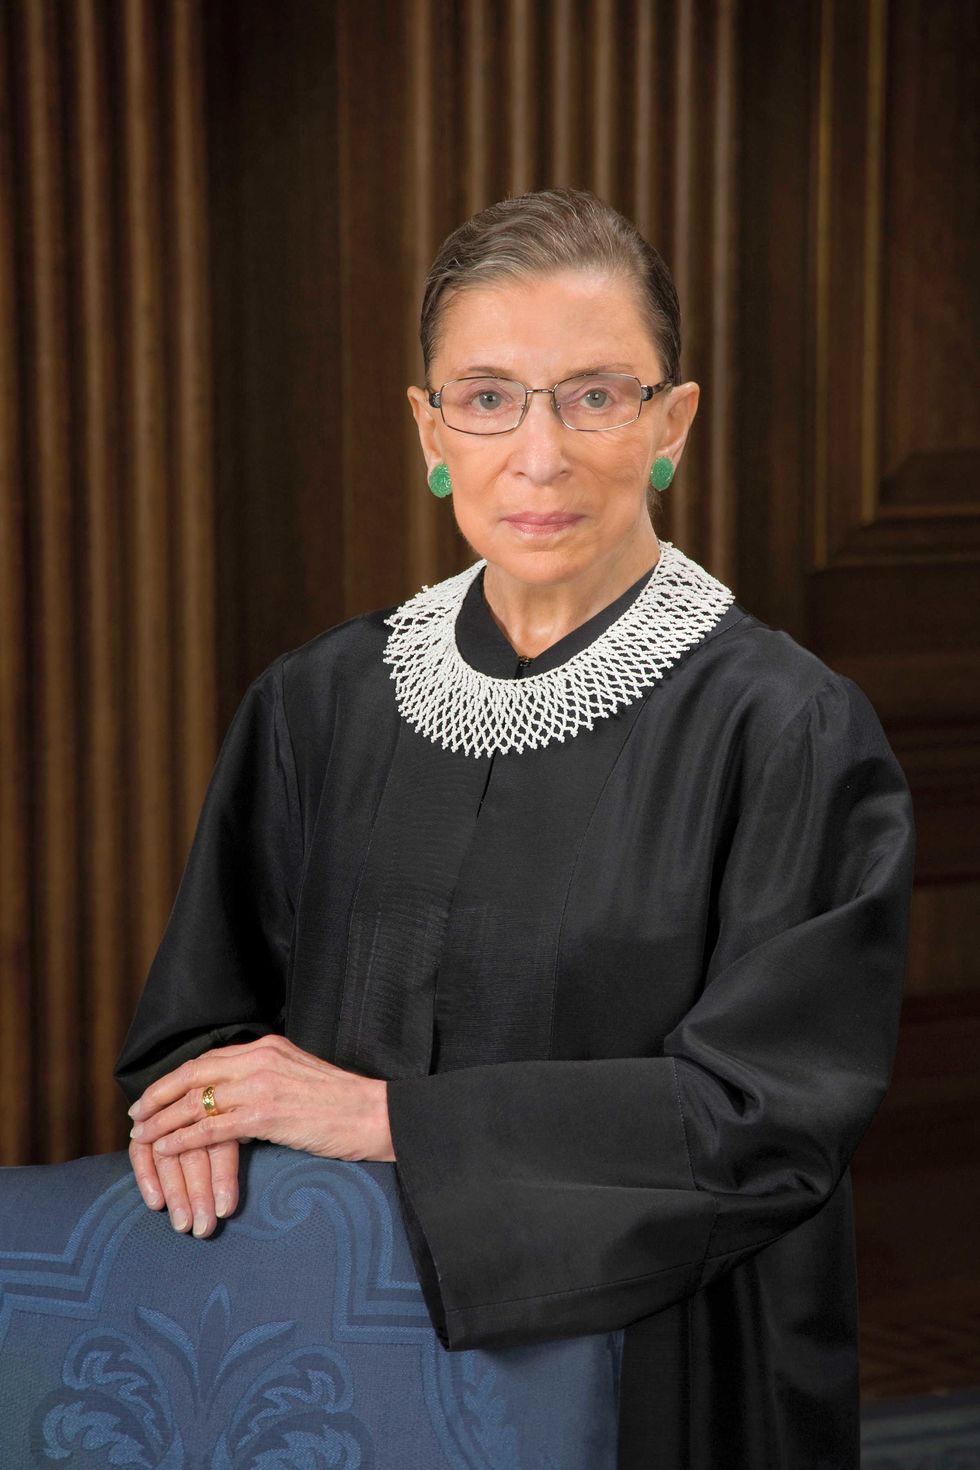 Ruth Bader Ginsburg's Death Reminds Us That We All Have A Responsibility To Forge On